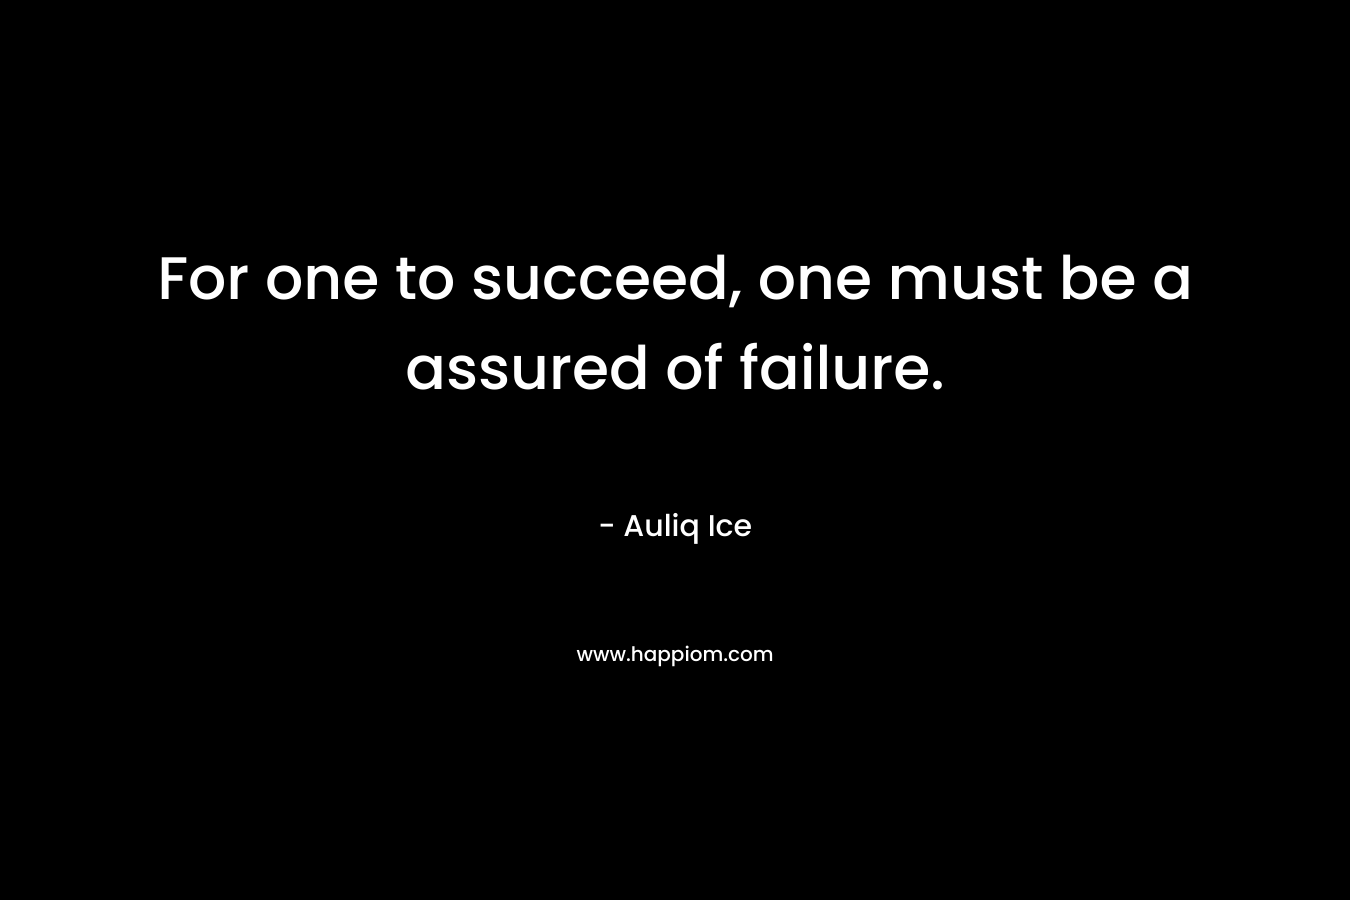 For one to succeed, one must be a assured of failure.